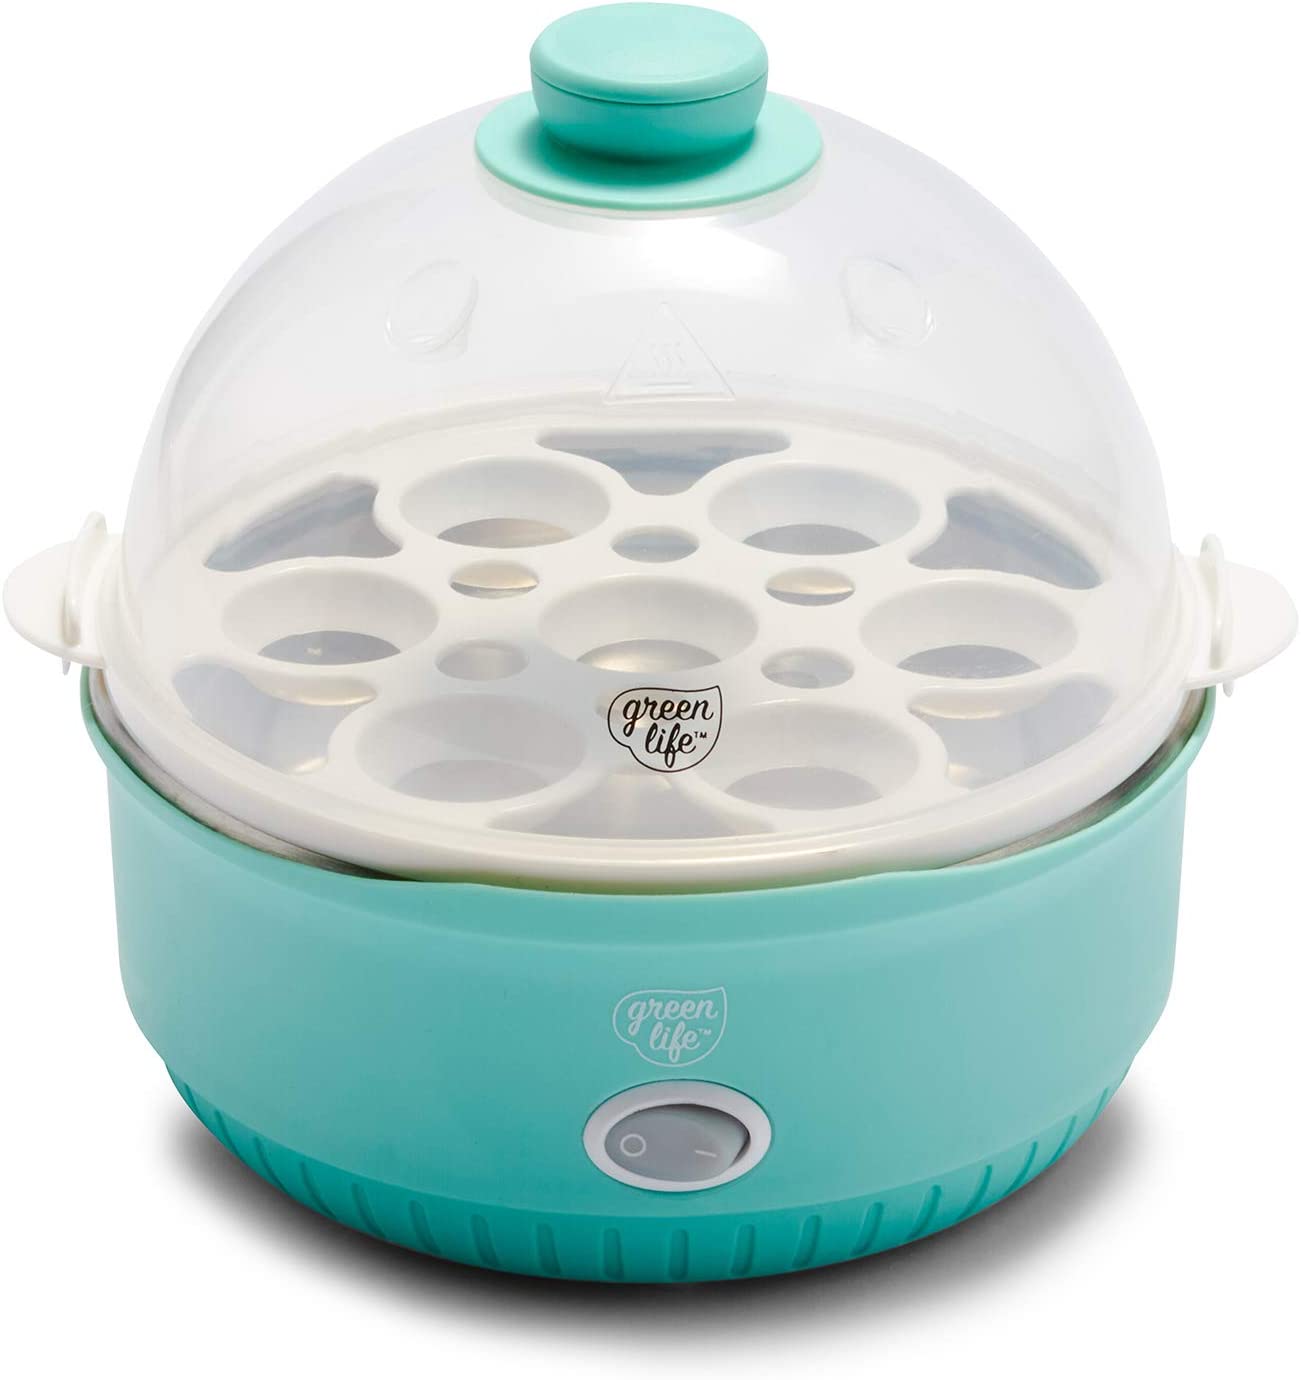 GreenLife CC003764-002 Qwik Egg Boiler, One Size, Turquoise